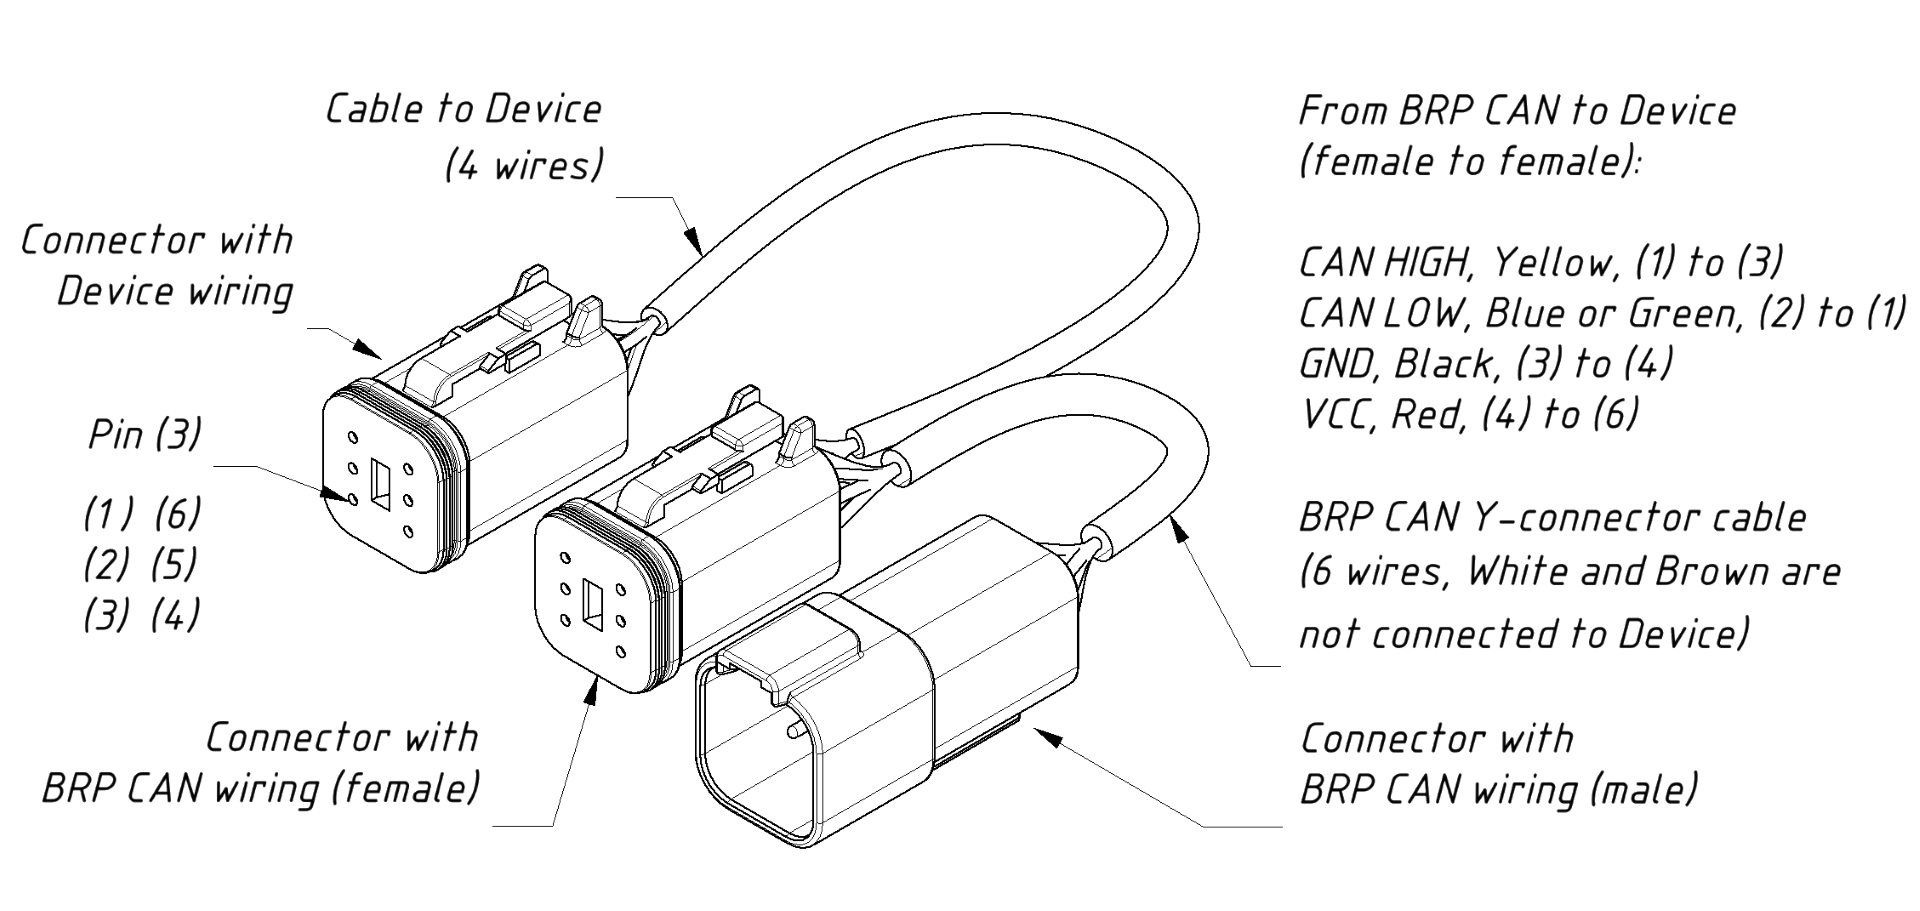 BRP CAN adaptor cable with Y-connector, click to enlarge